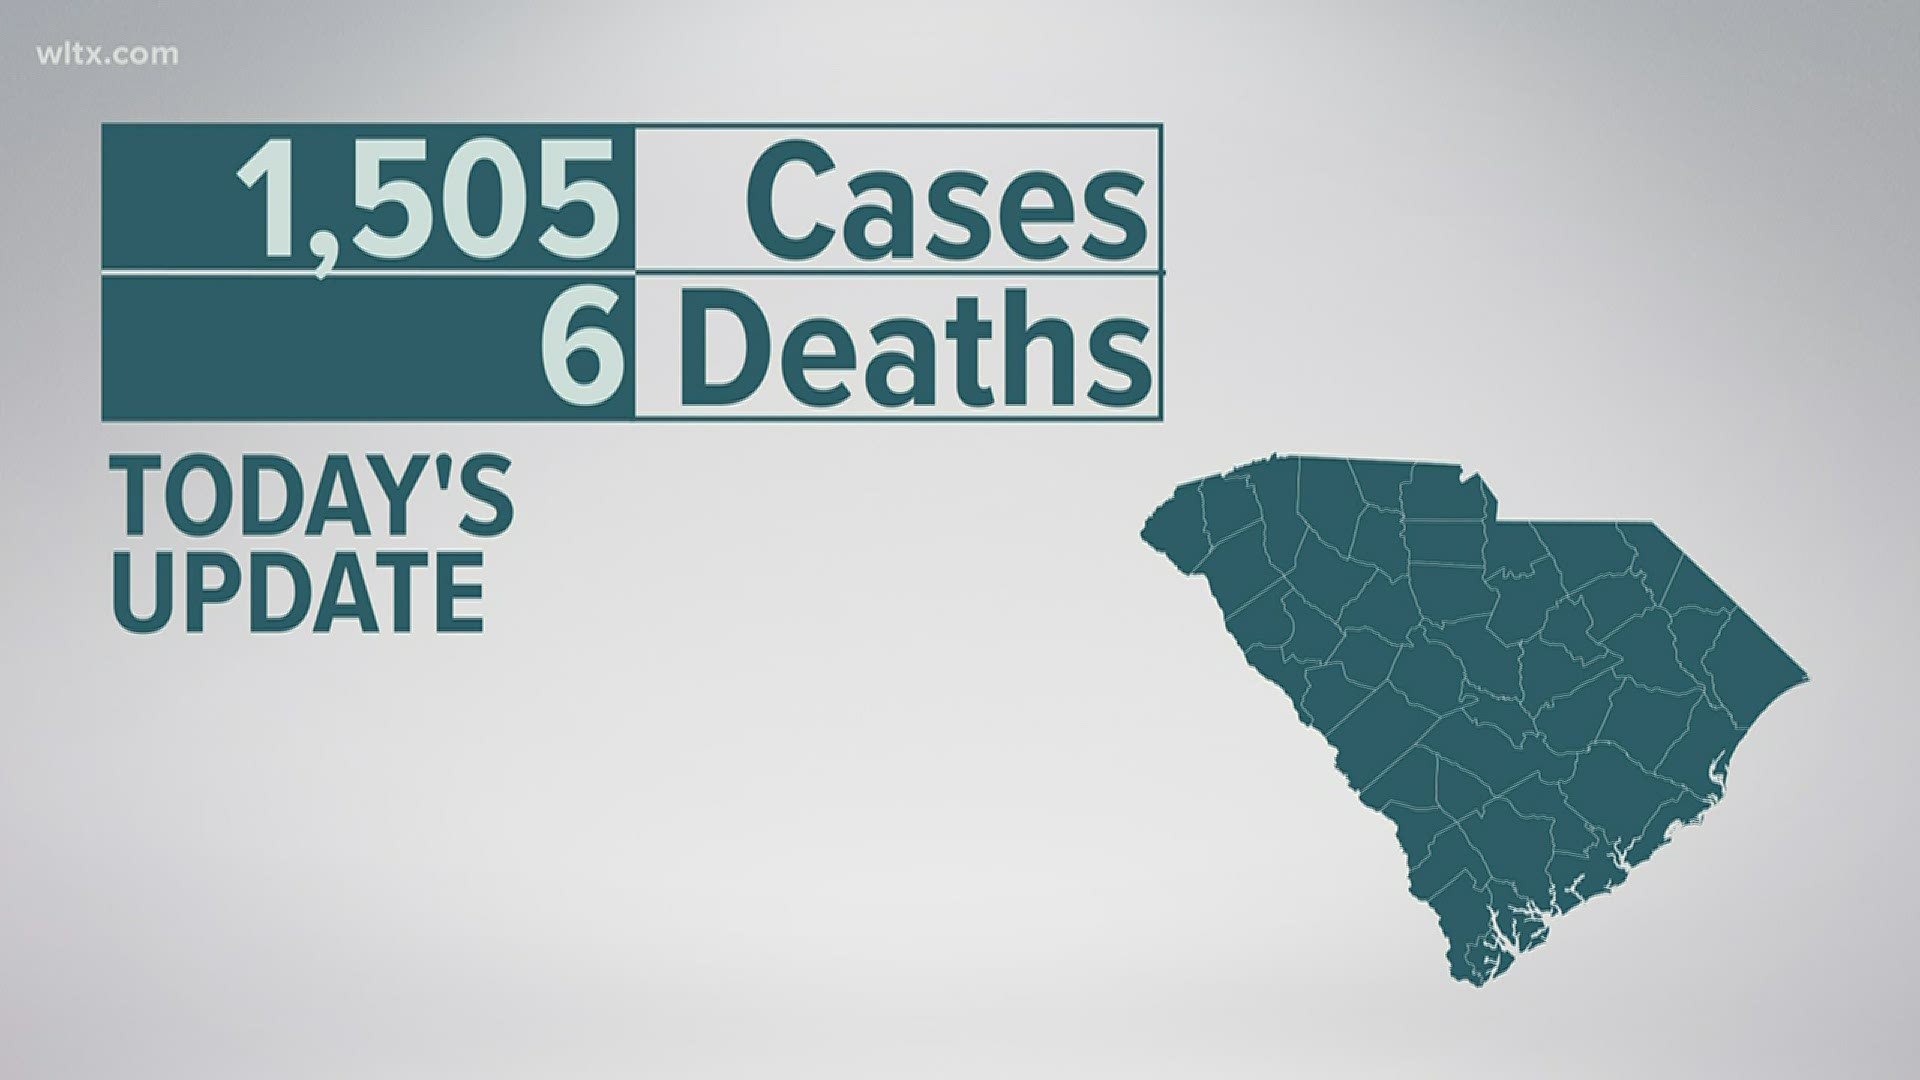 This brings the total number of confirmed cases to 46,247, probable cases to 133, confirmed deaths to 819, and 8 probable deaths